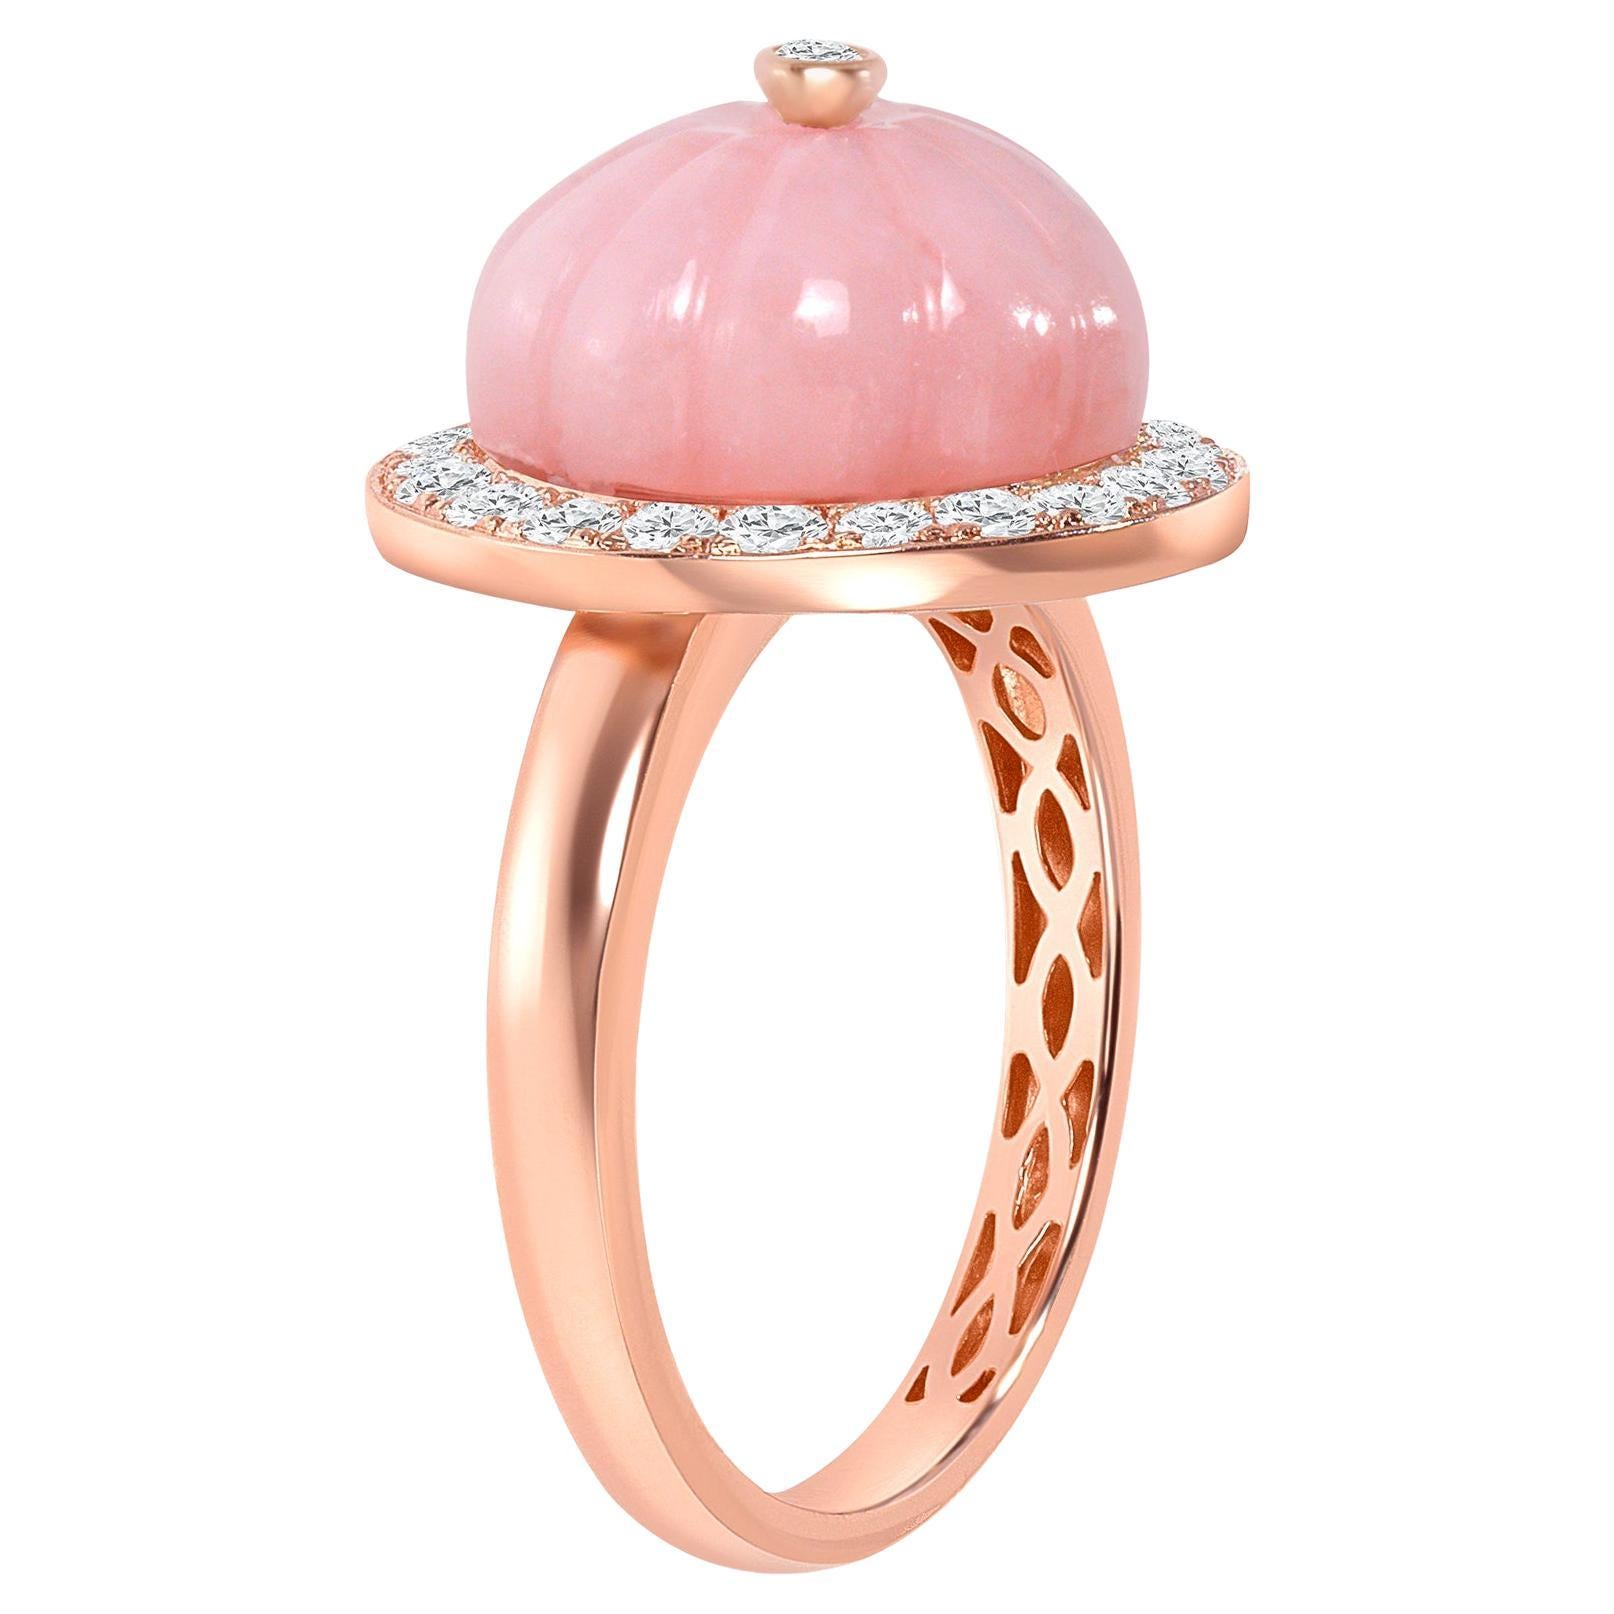 Step into sophistication with this unique ring, meticulously fashioned in luxurious 14k gold, showcasing a mesmerizing pink opal encircled by shimmering diamonds. Its exquisite design exudes elegance and style, making it the perfect complement to